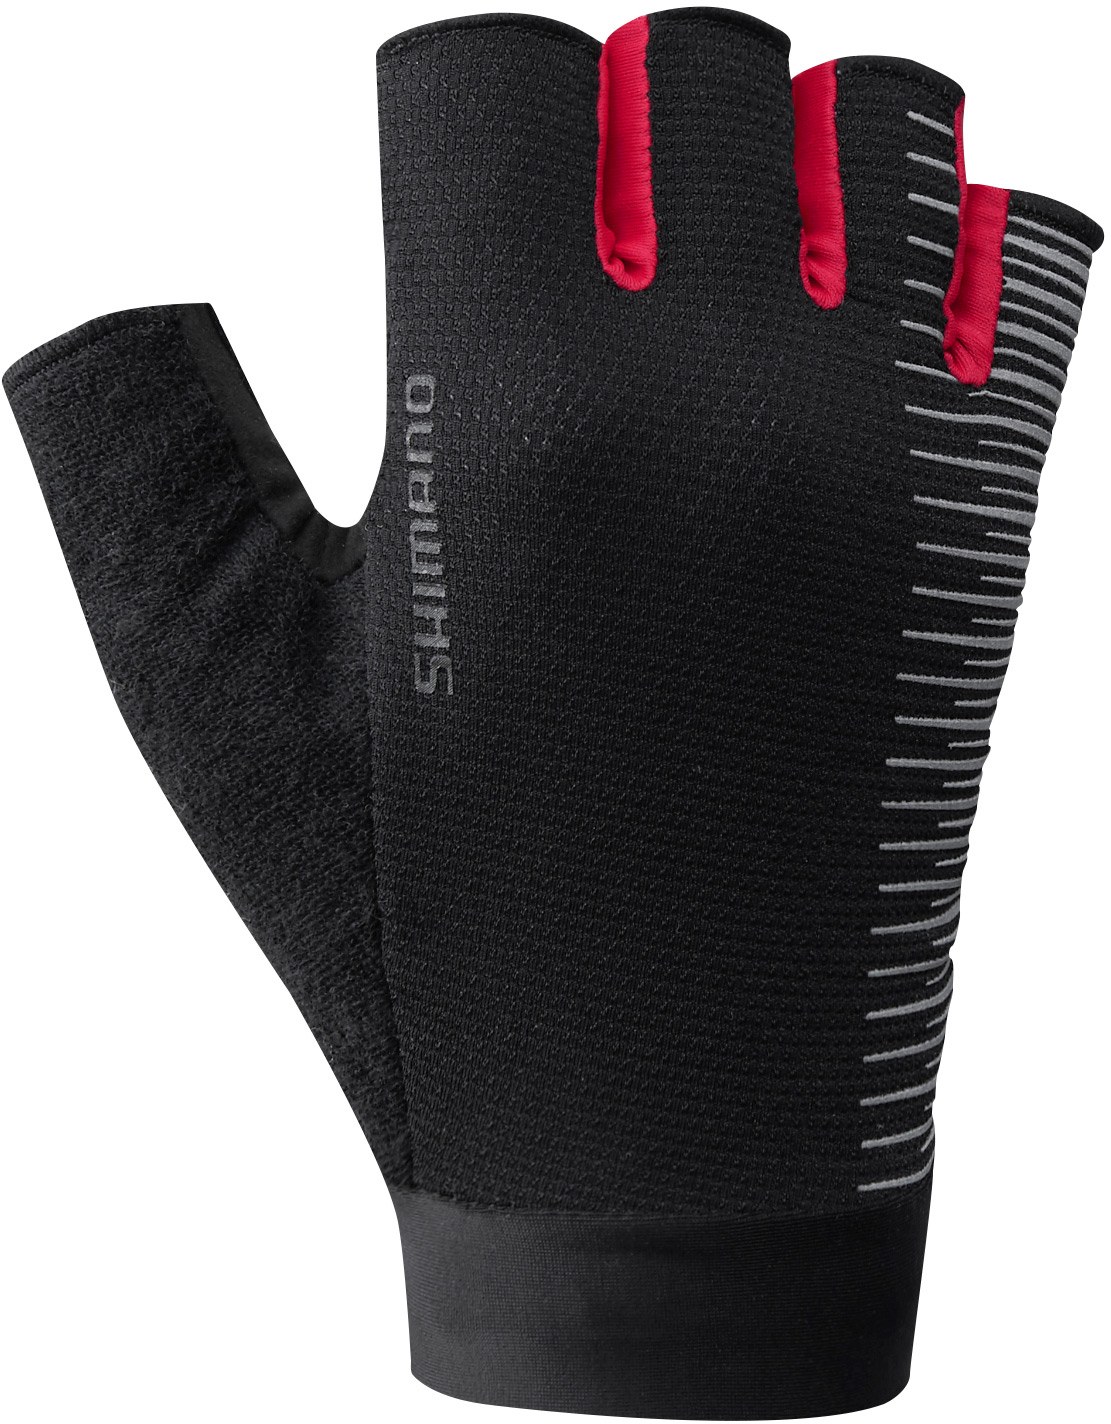 unisex-classic-gloves-red-size-m